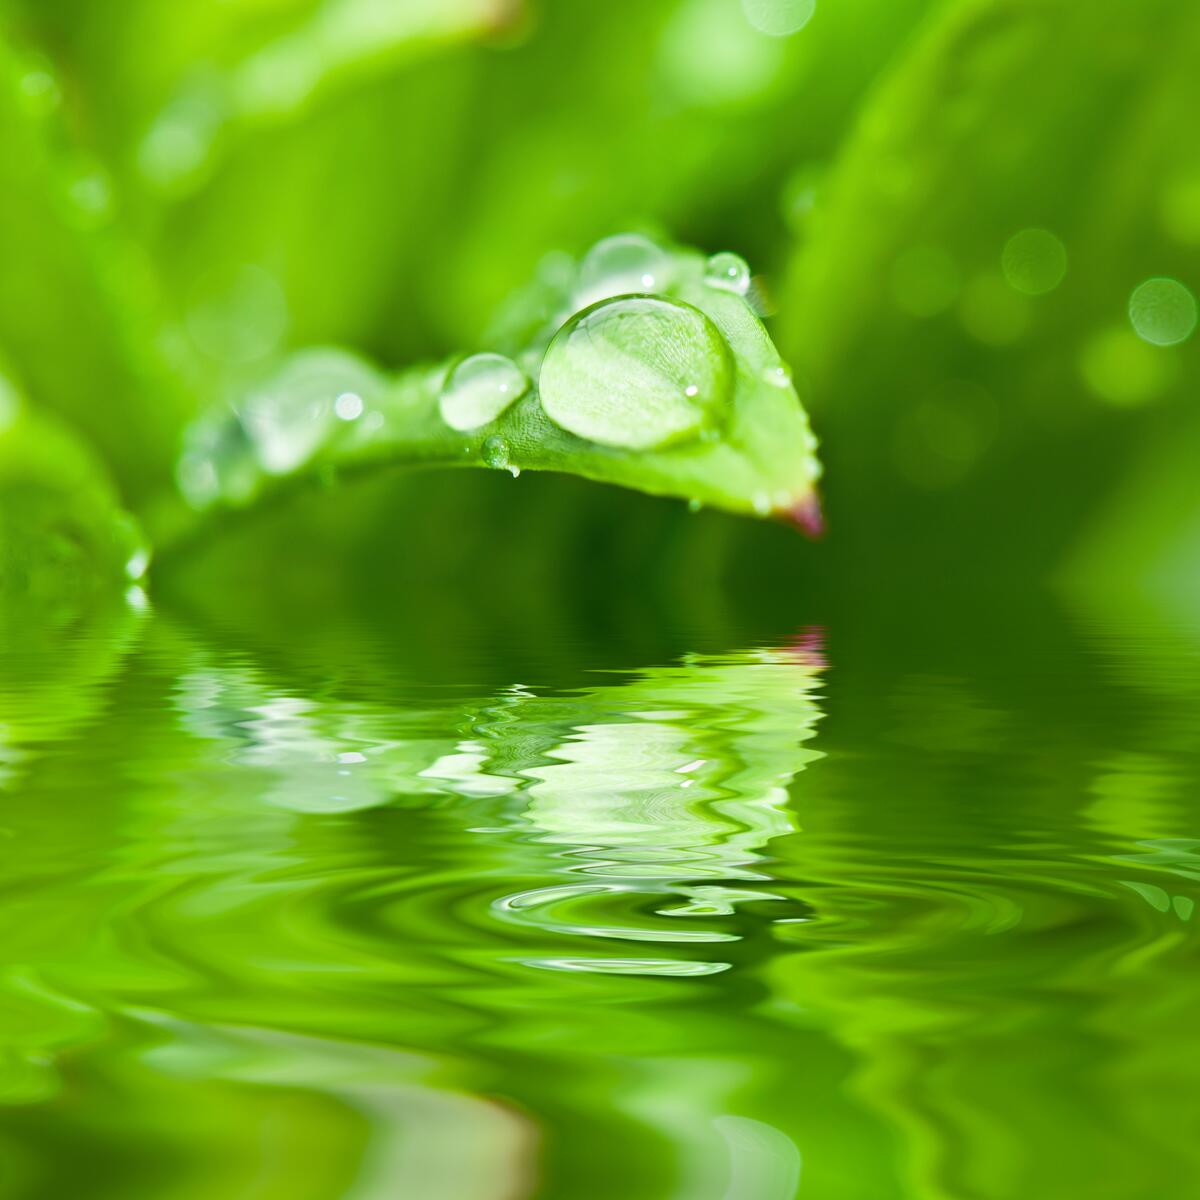 A drop of water on a leaf growing over the water.